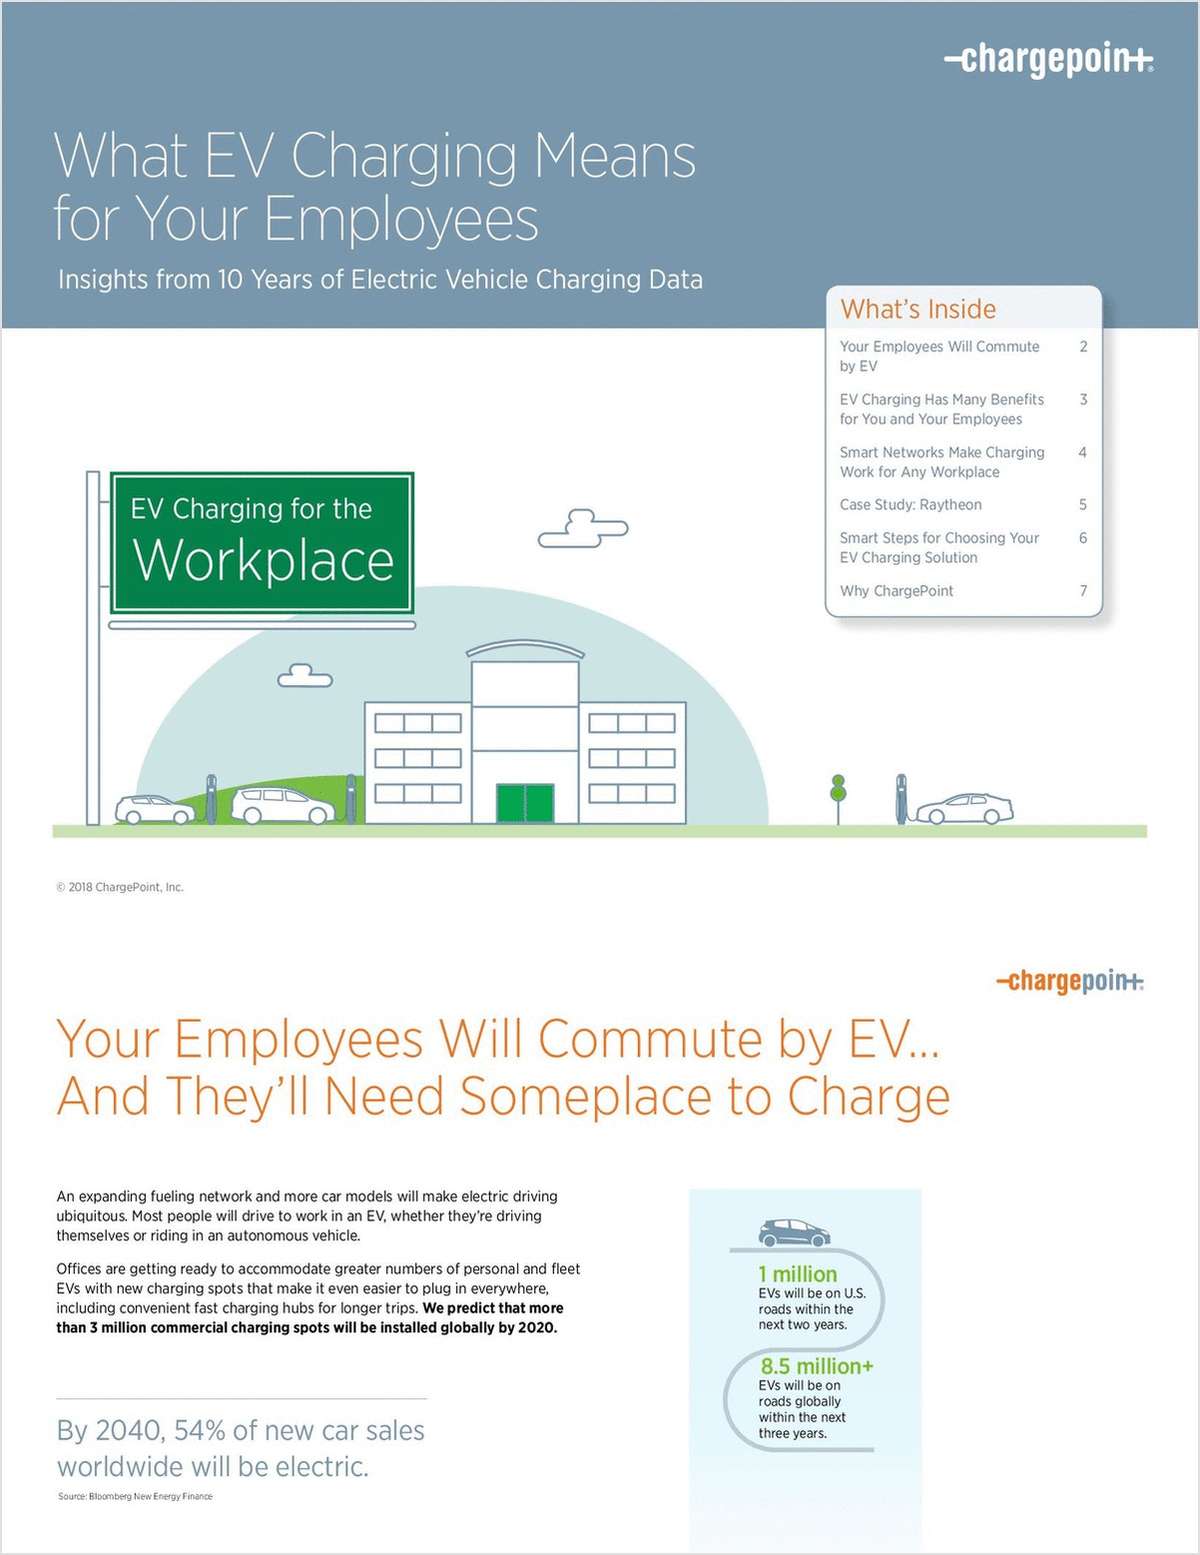 An Employer's Guide to EV Charging in the Workplace